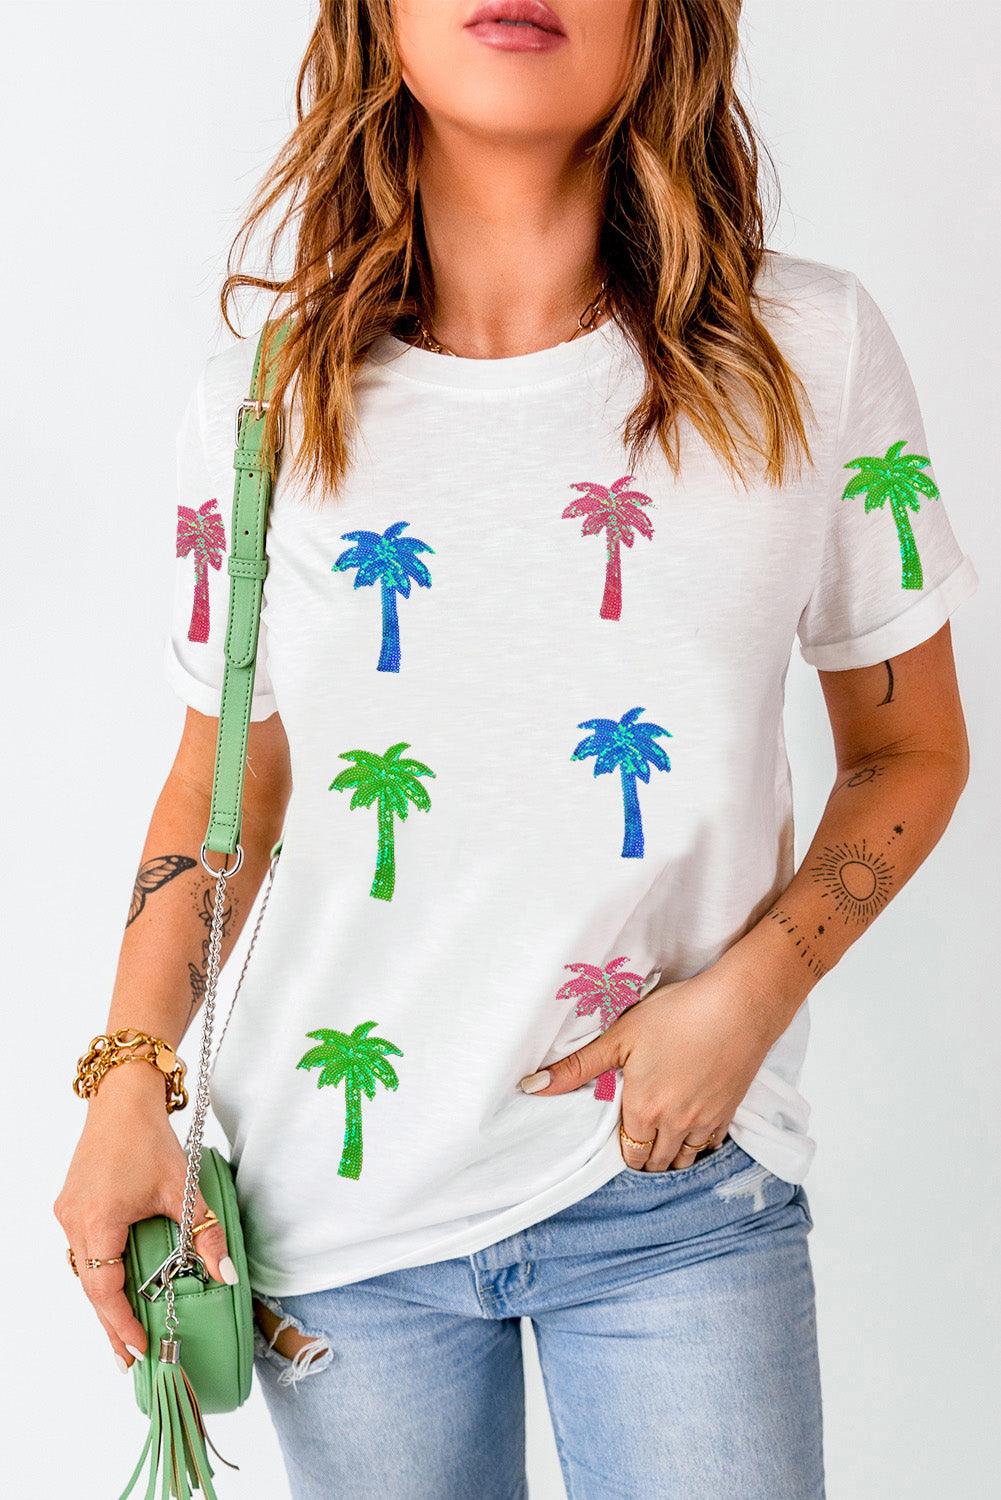 White Sequin Coconut Tree Graphic T Shirt